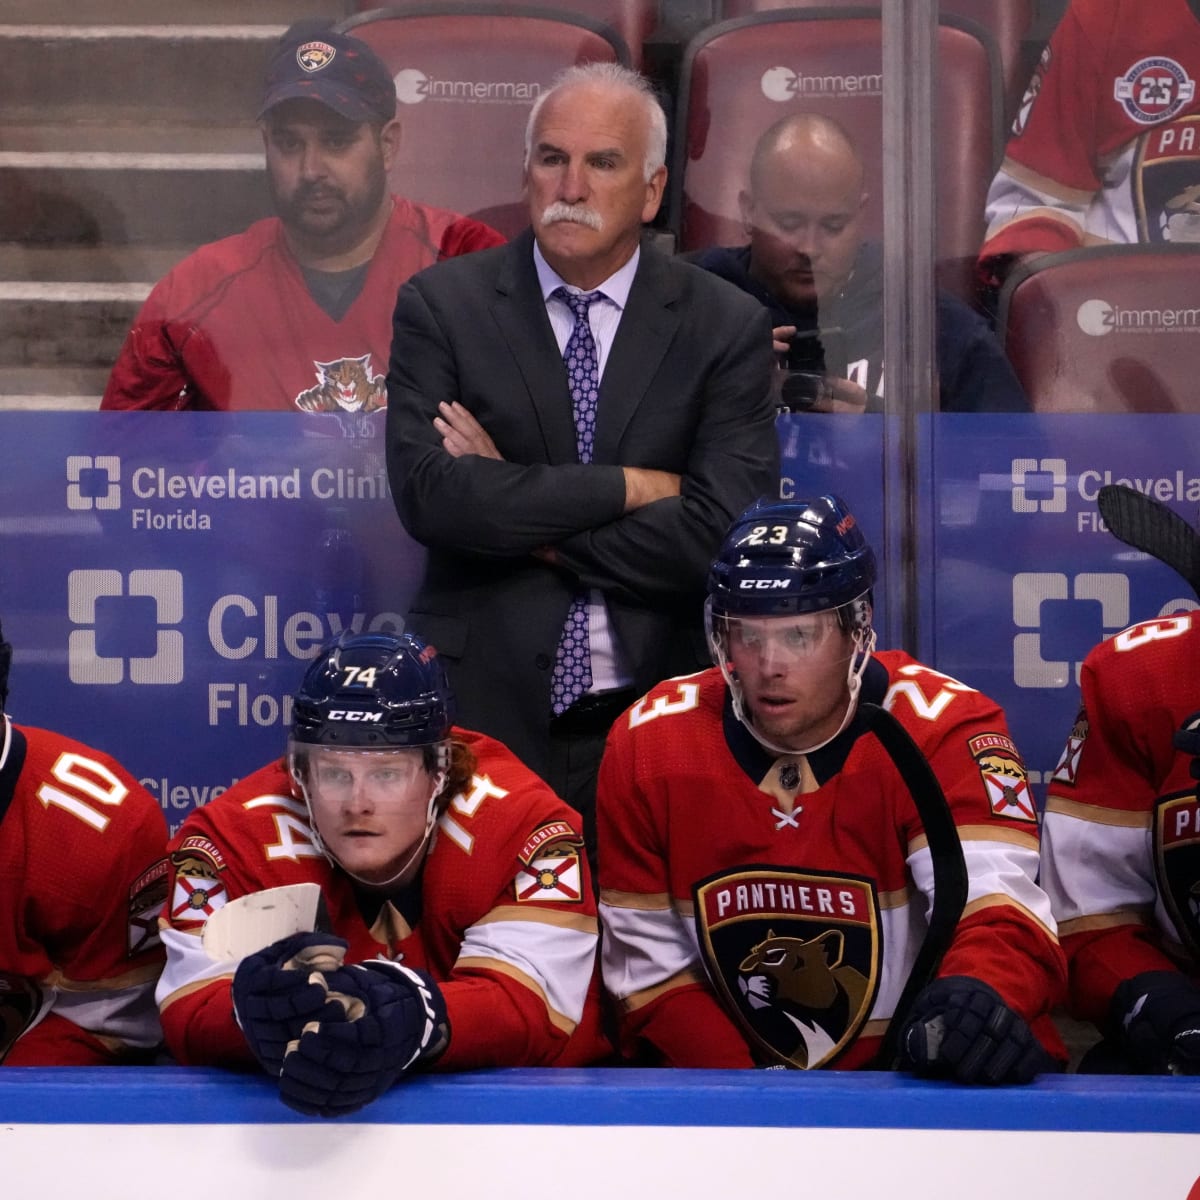 Florida Panthers: What Should Joel Quenneville Focus On This Year?